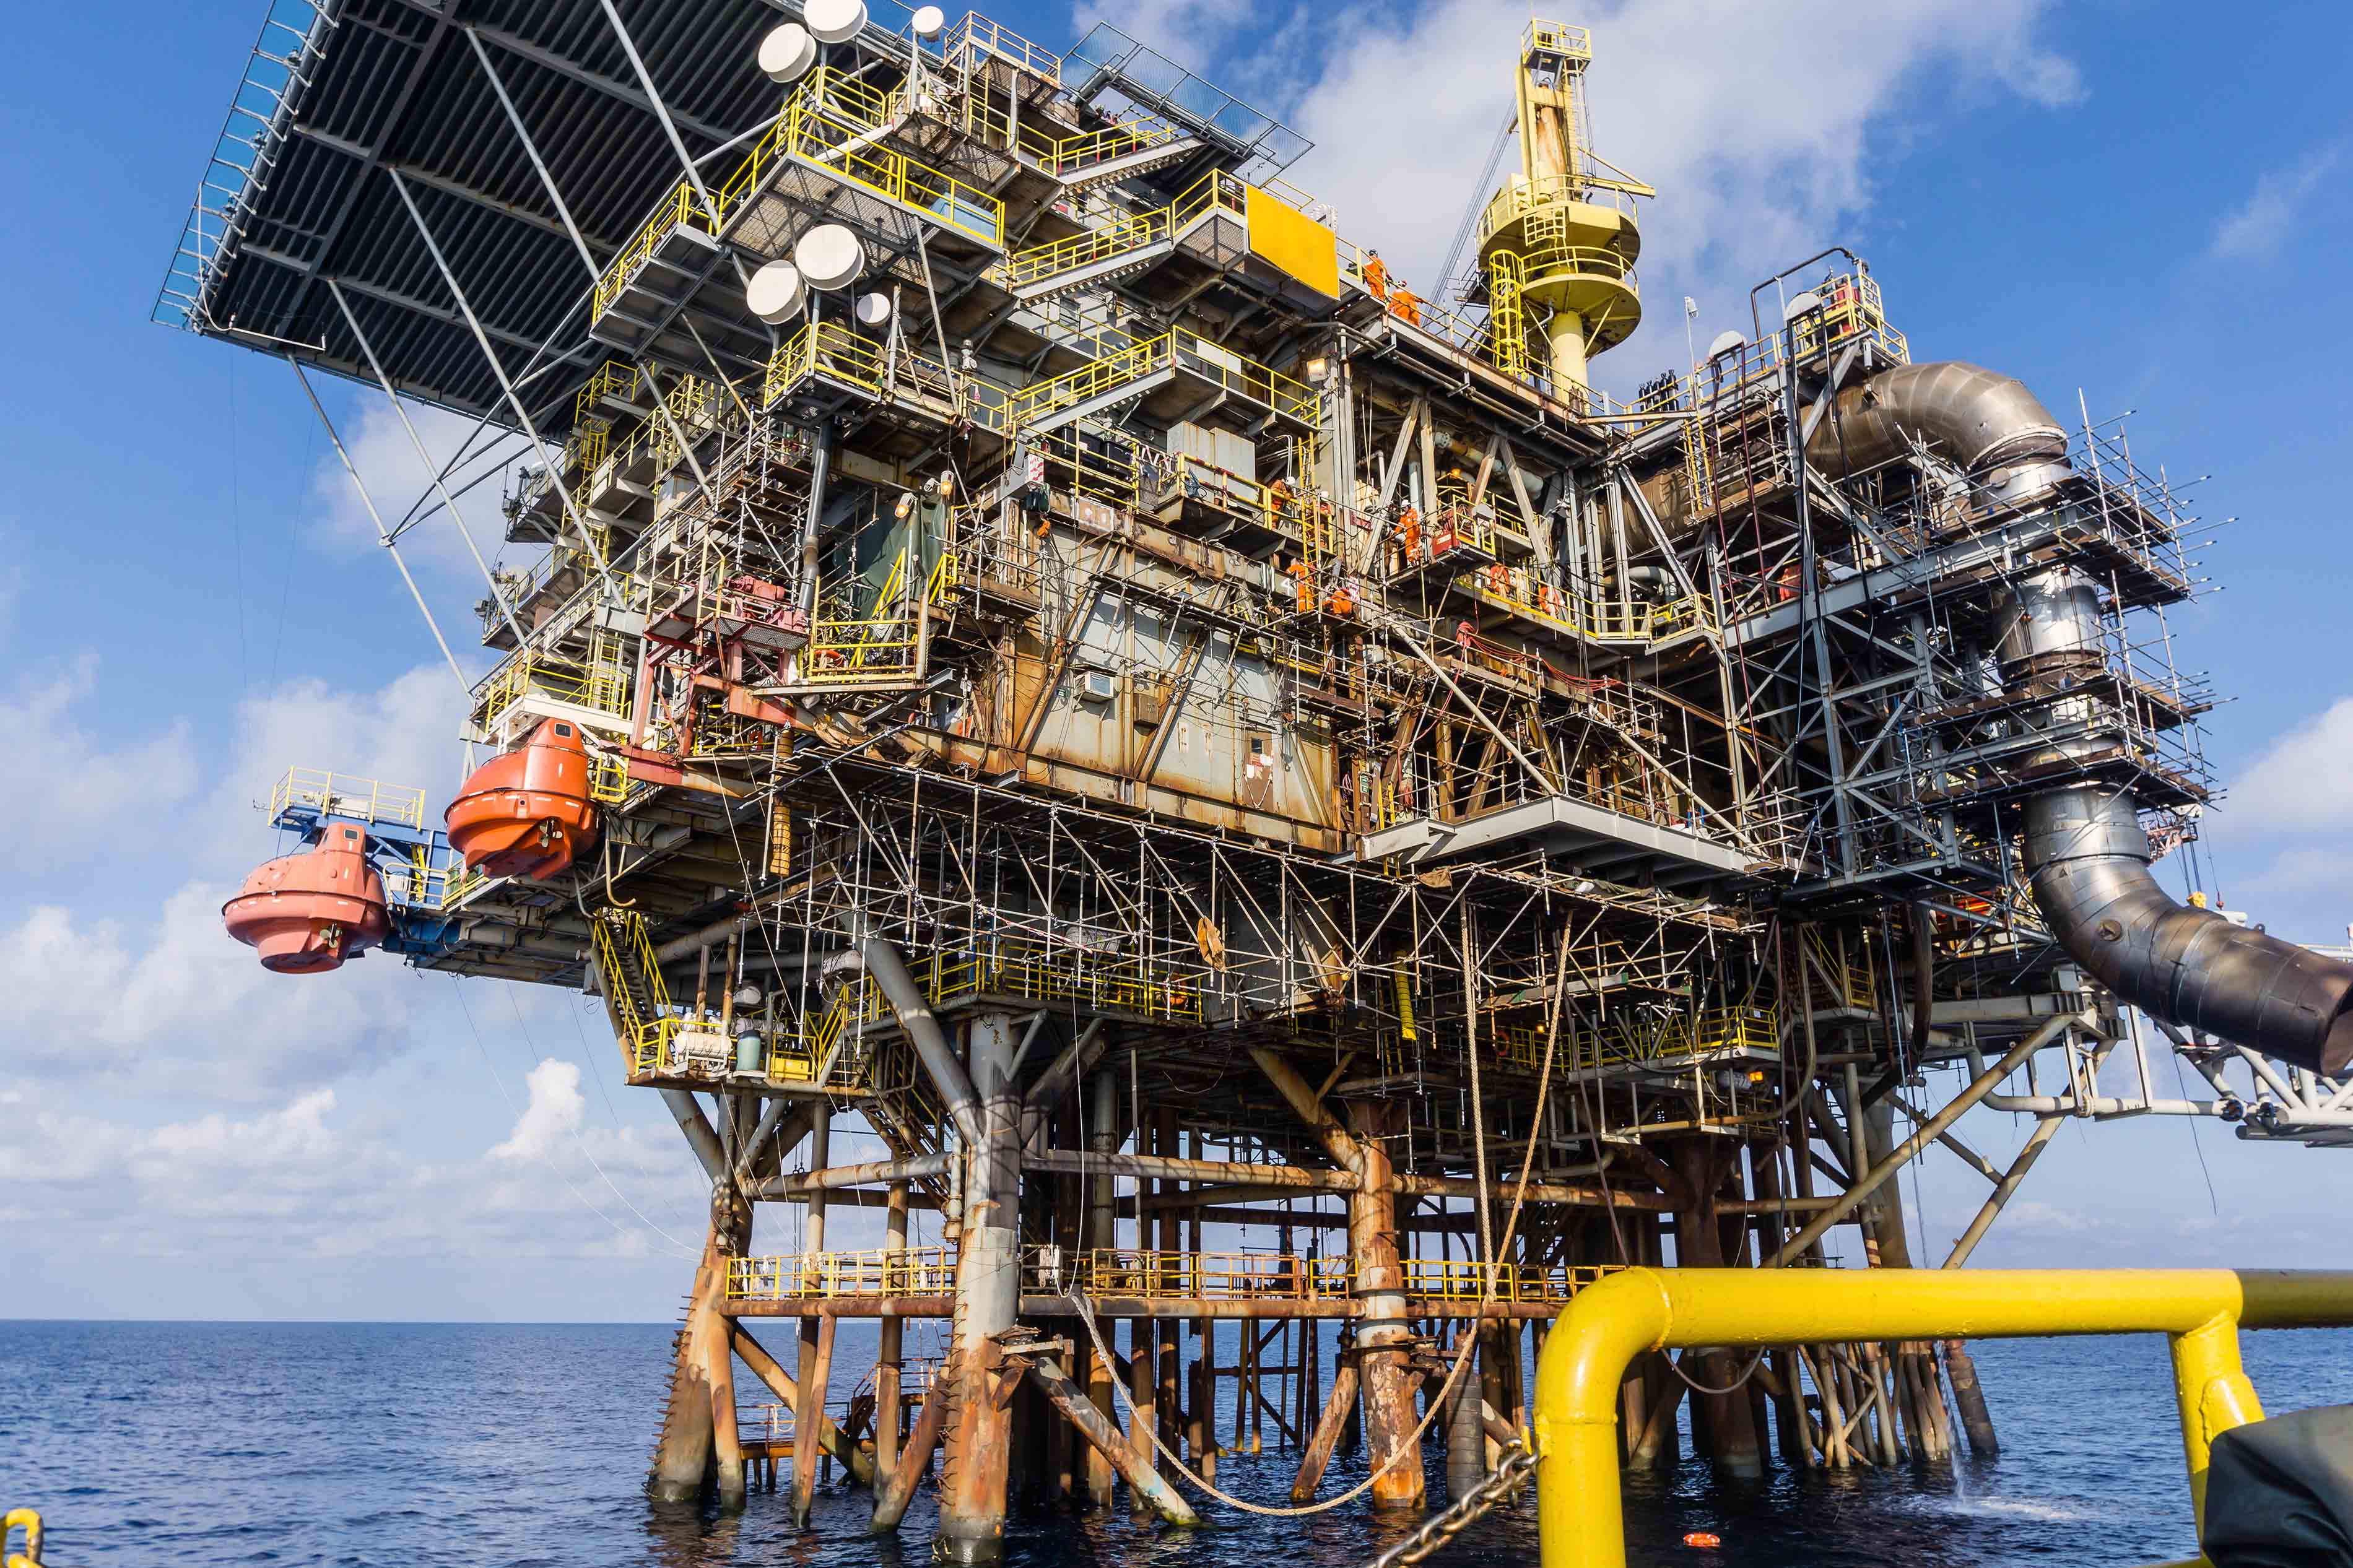 Image of aging oil rig in middle of Gulf of Mexico